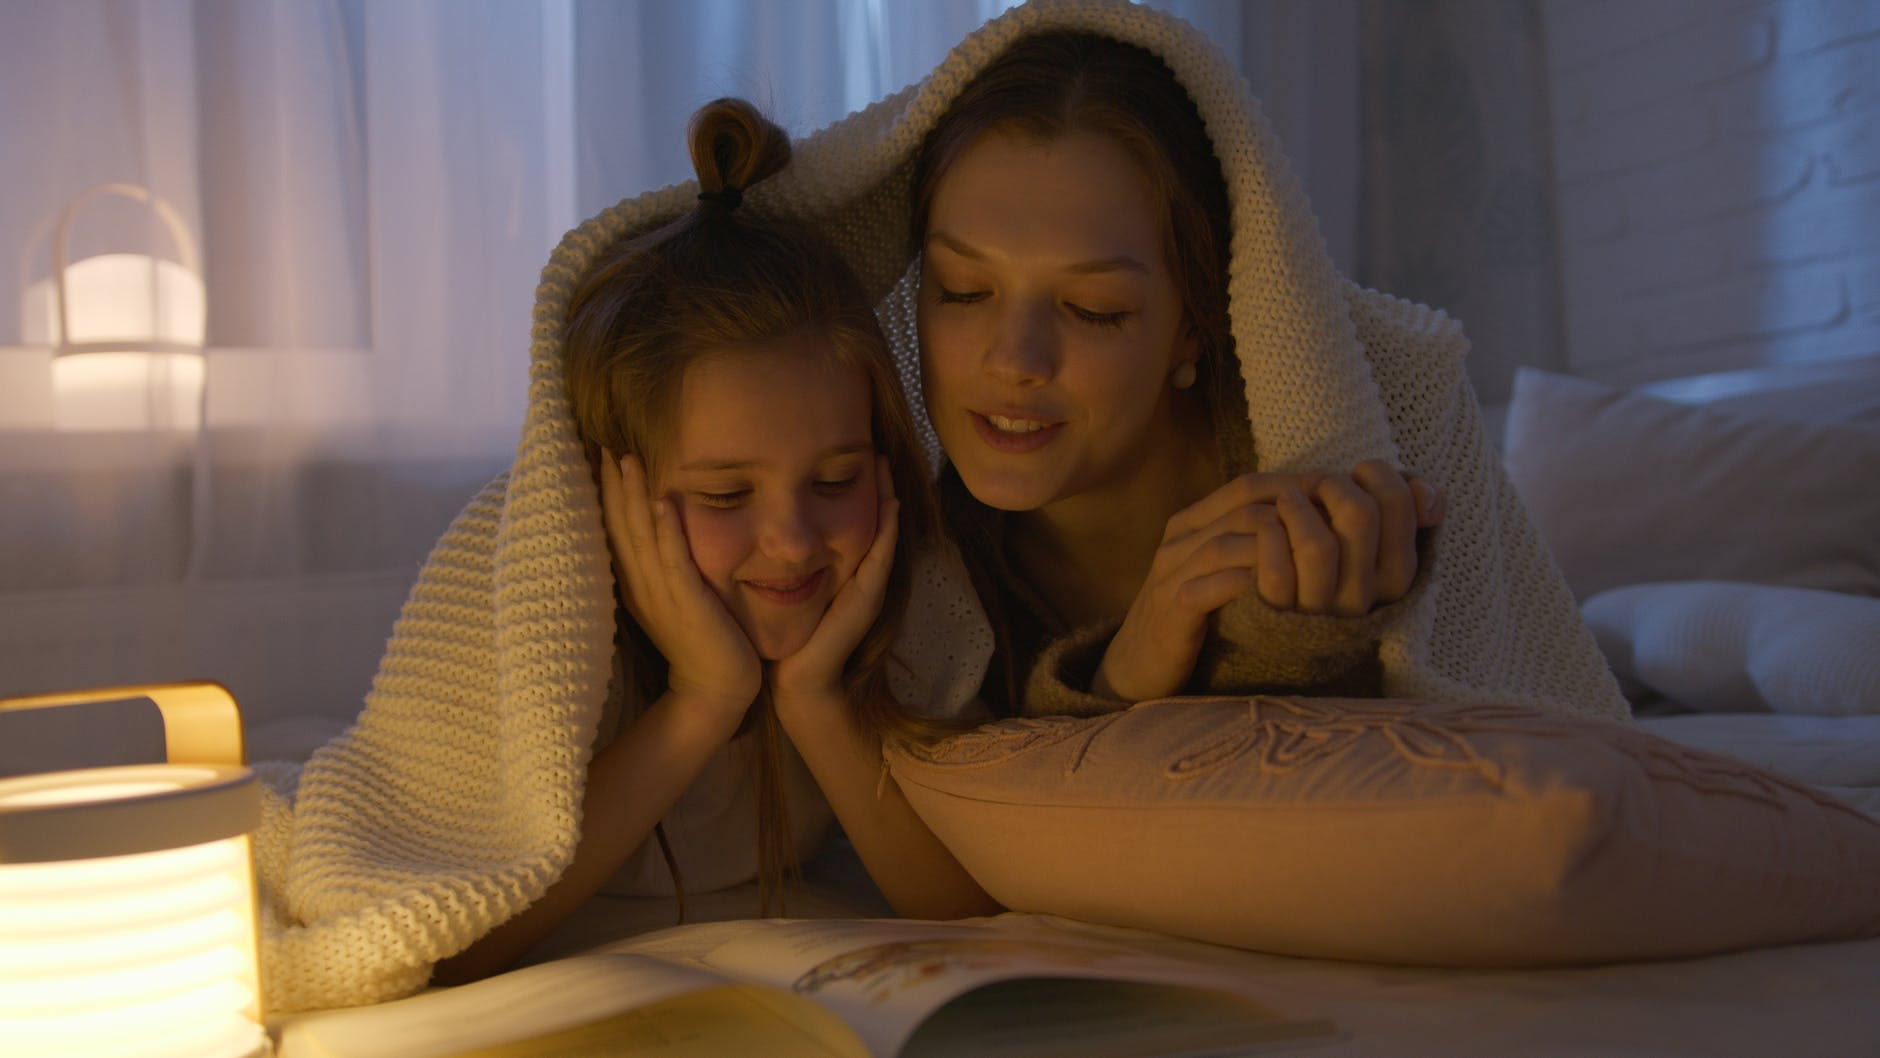 How Bedtime Stories Can Help Kids Develop a Love of Learning